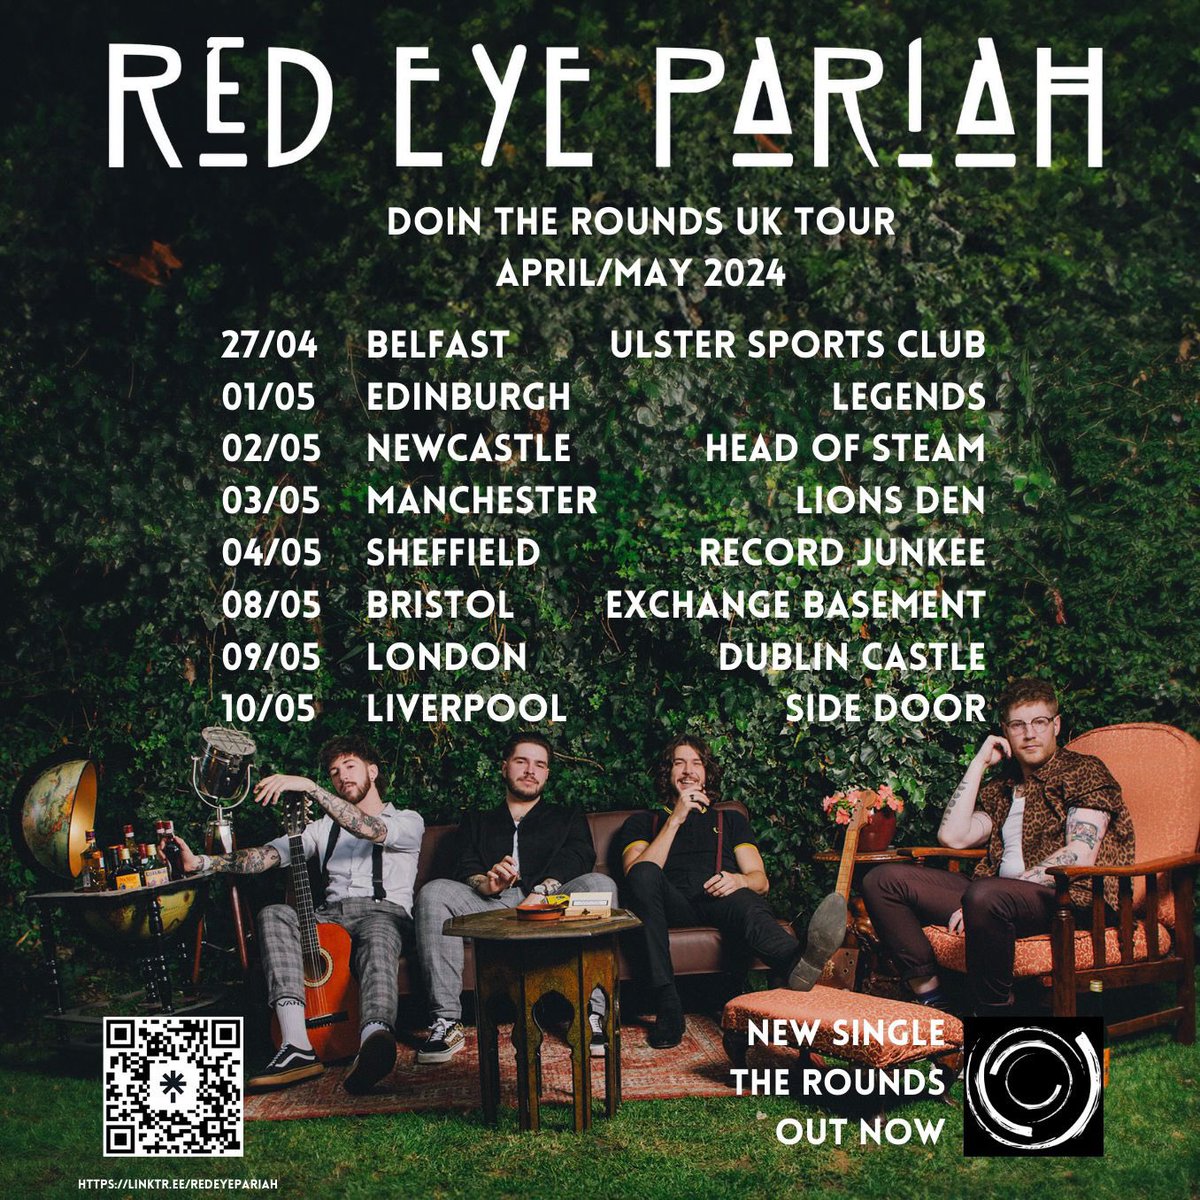 This time in 2 weeks we’ll be unloading the van into Legends for our Scottish debut 🏴󠁧󠁢󠁳󠁣󠁴󠁿 Can’t wait to get on the road and start making noise all over the UK! Get your tickets here ➡️ bit.ly/DoinTheRoundsT… Red Eye Pariah Doin The Rounds UK Tour